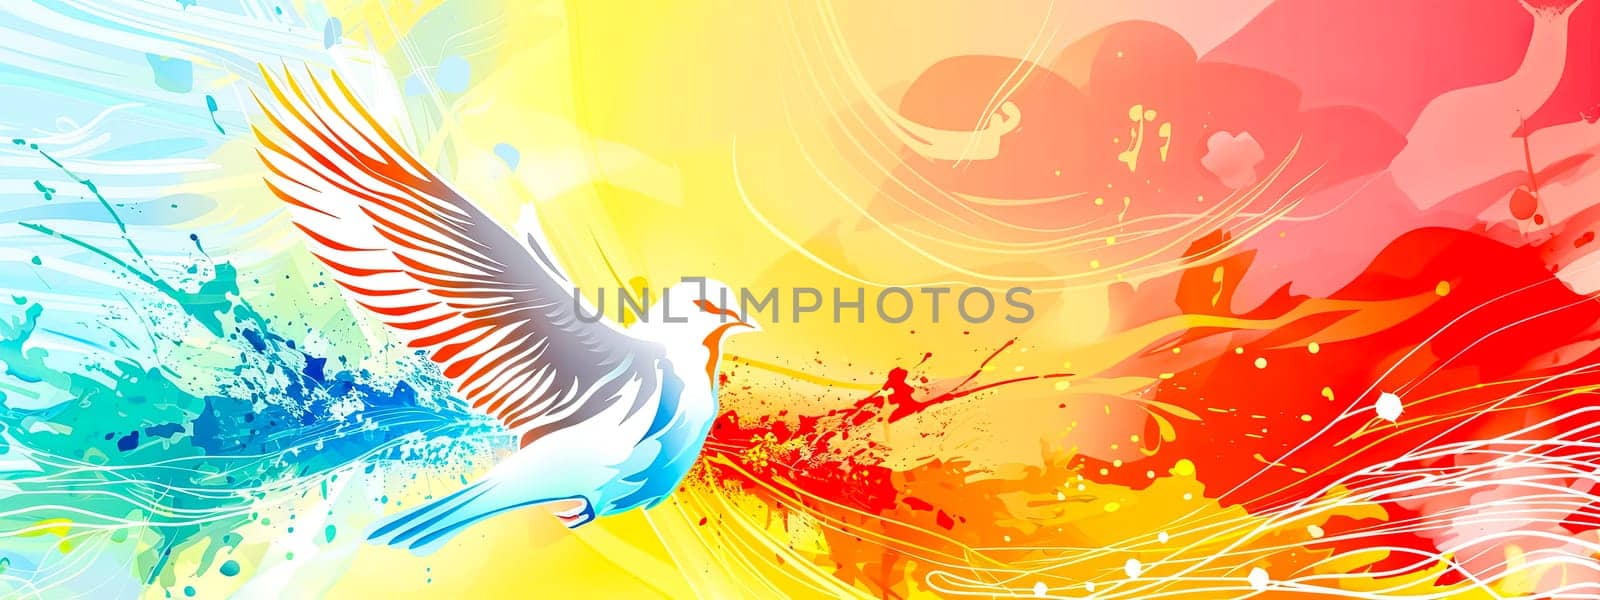 A white dove flies over a vibrant sunset, symbolizing peace and hope, copy space